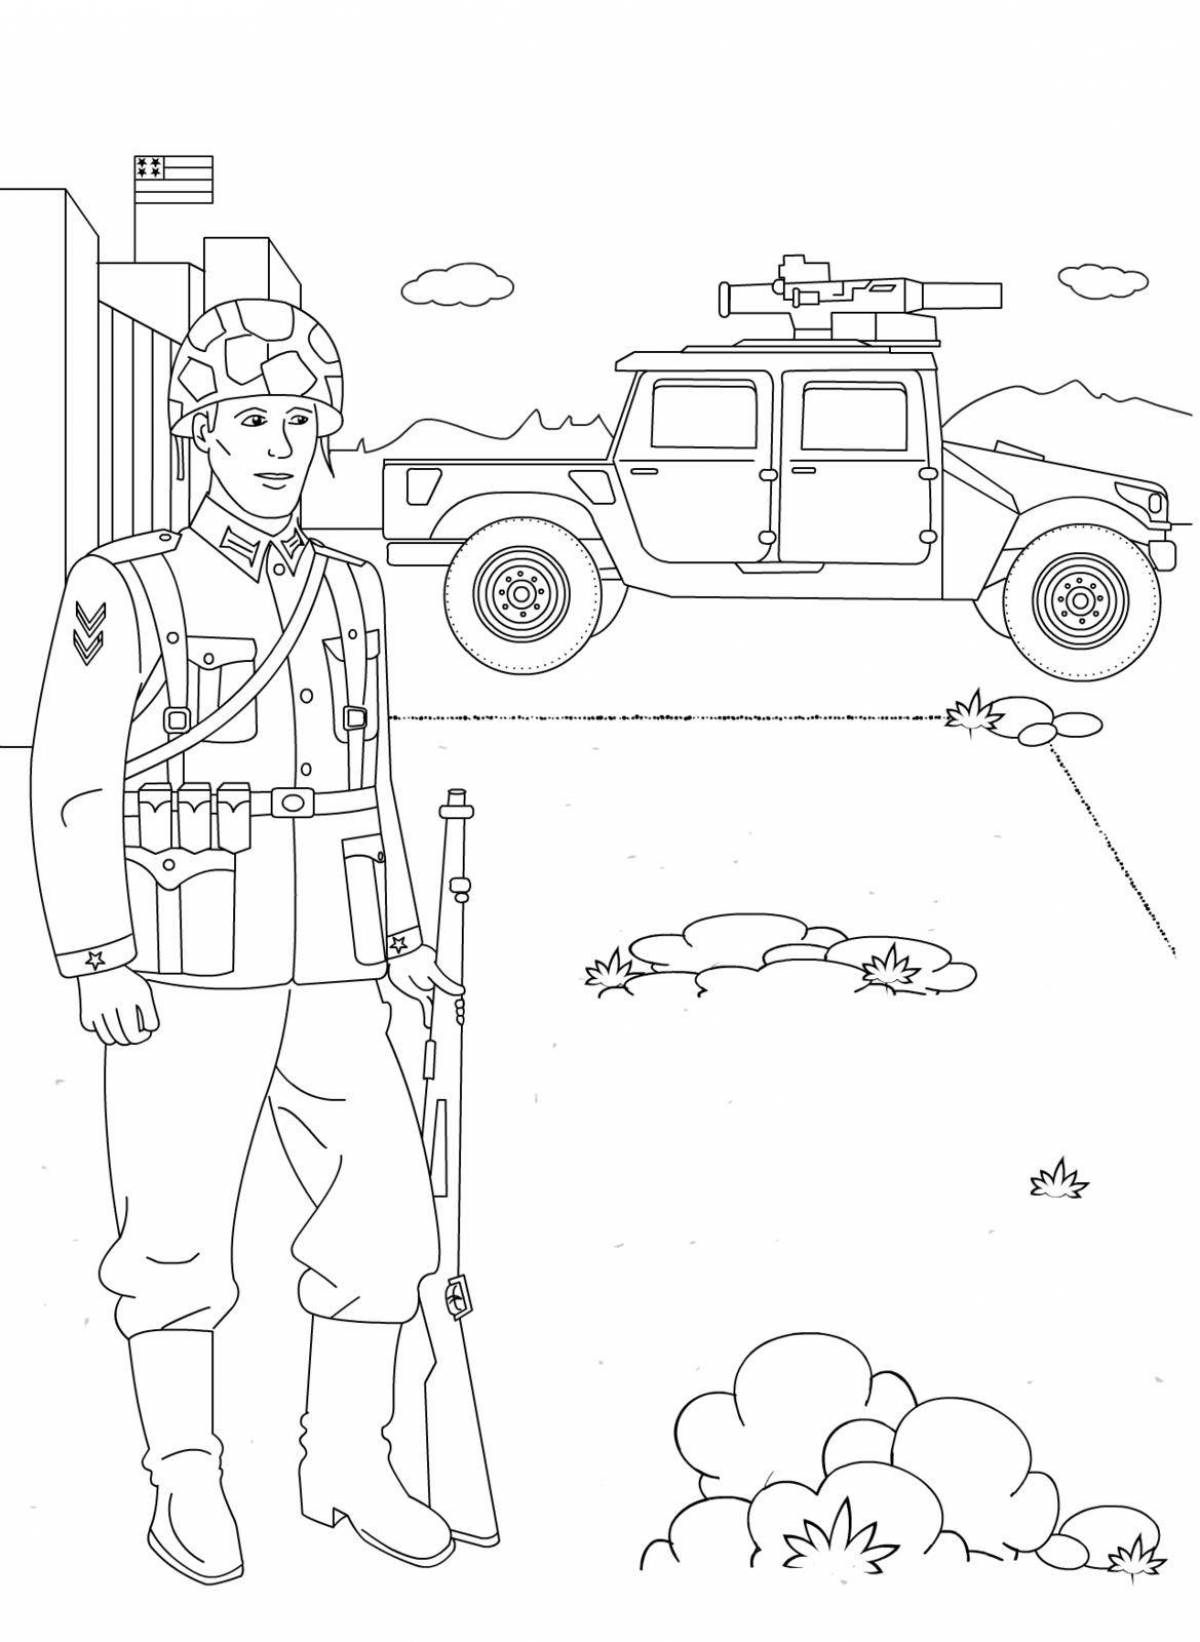 Nice Russian soldier coloring pages for kids